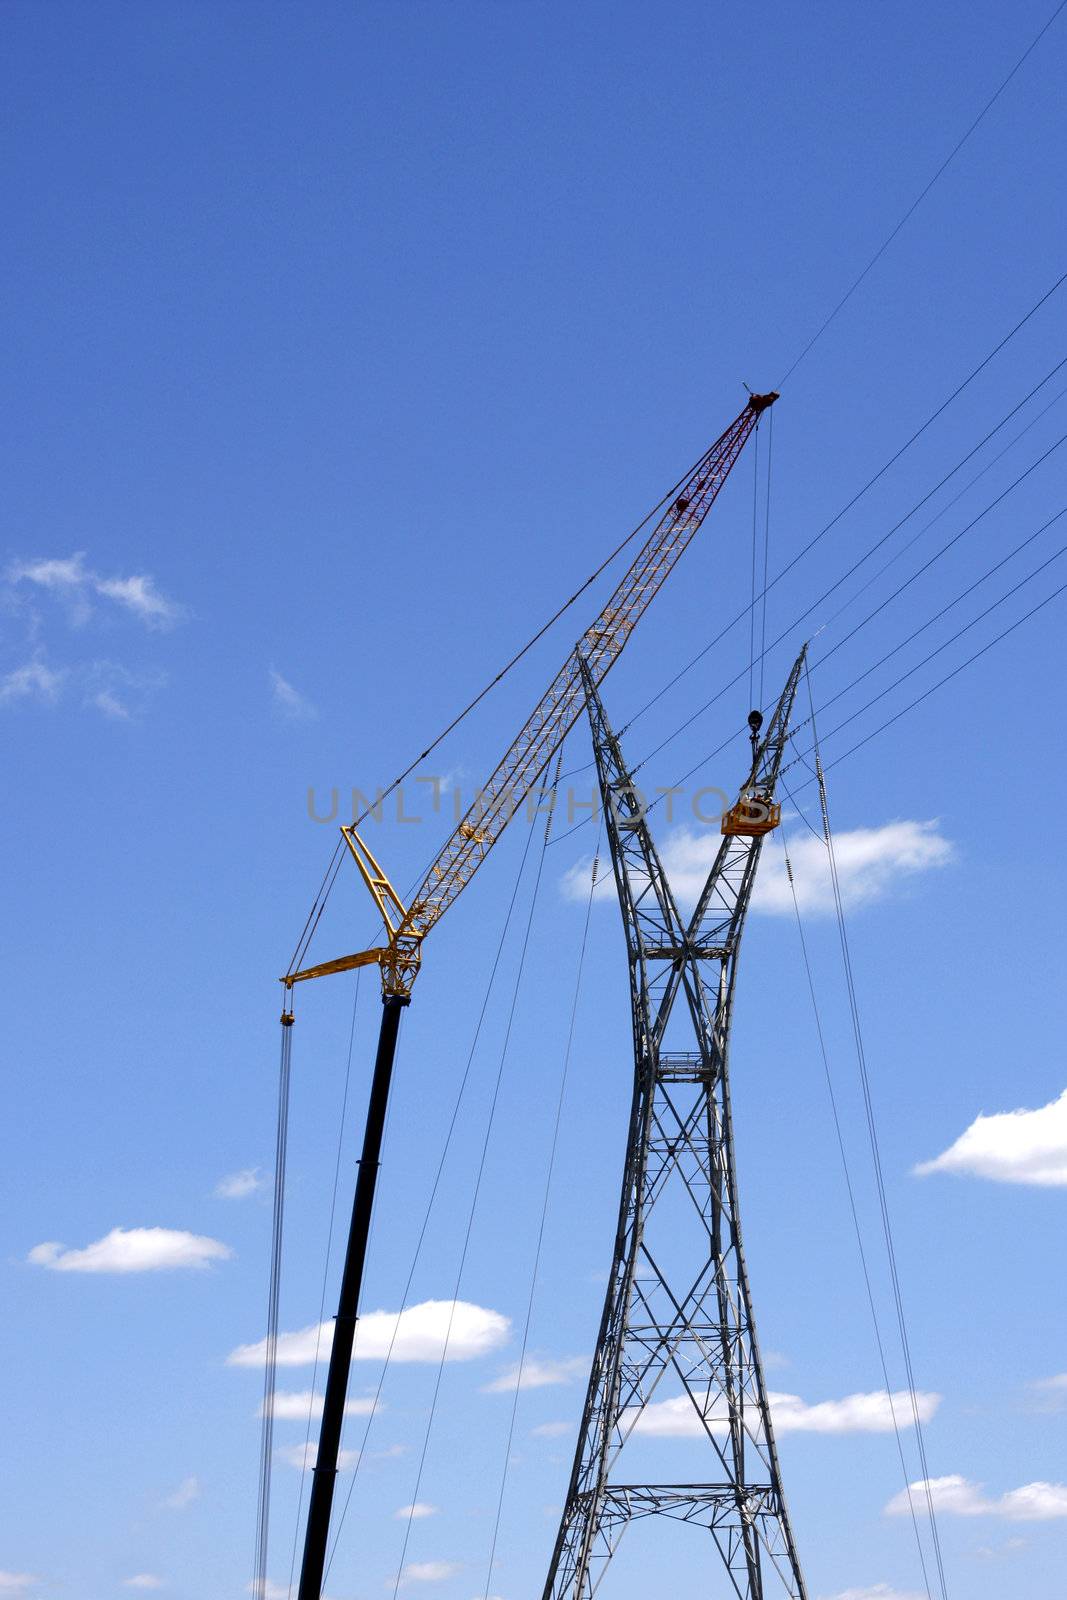 Electrical power lines with a tall crane